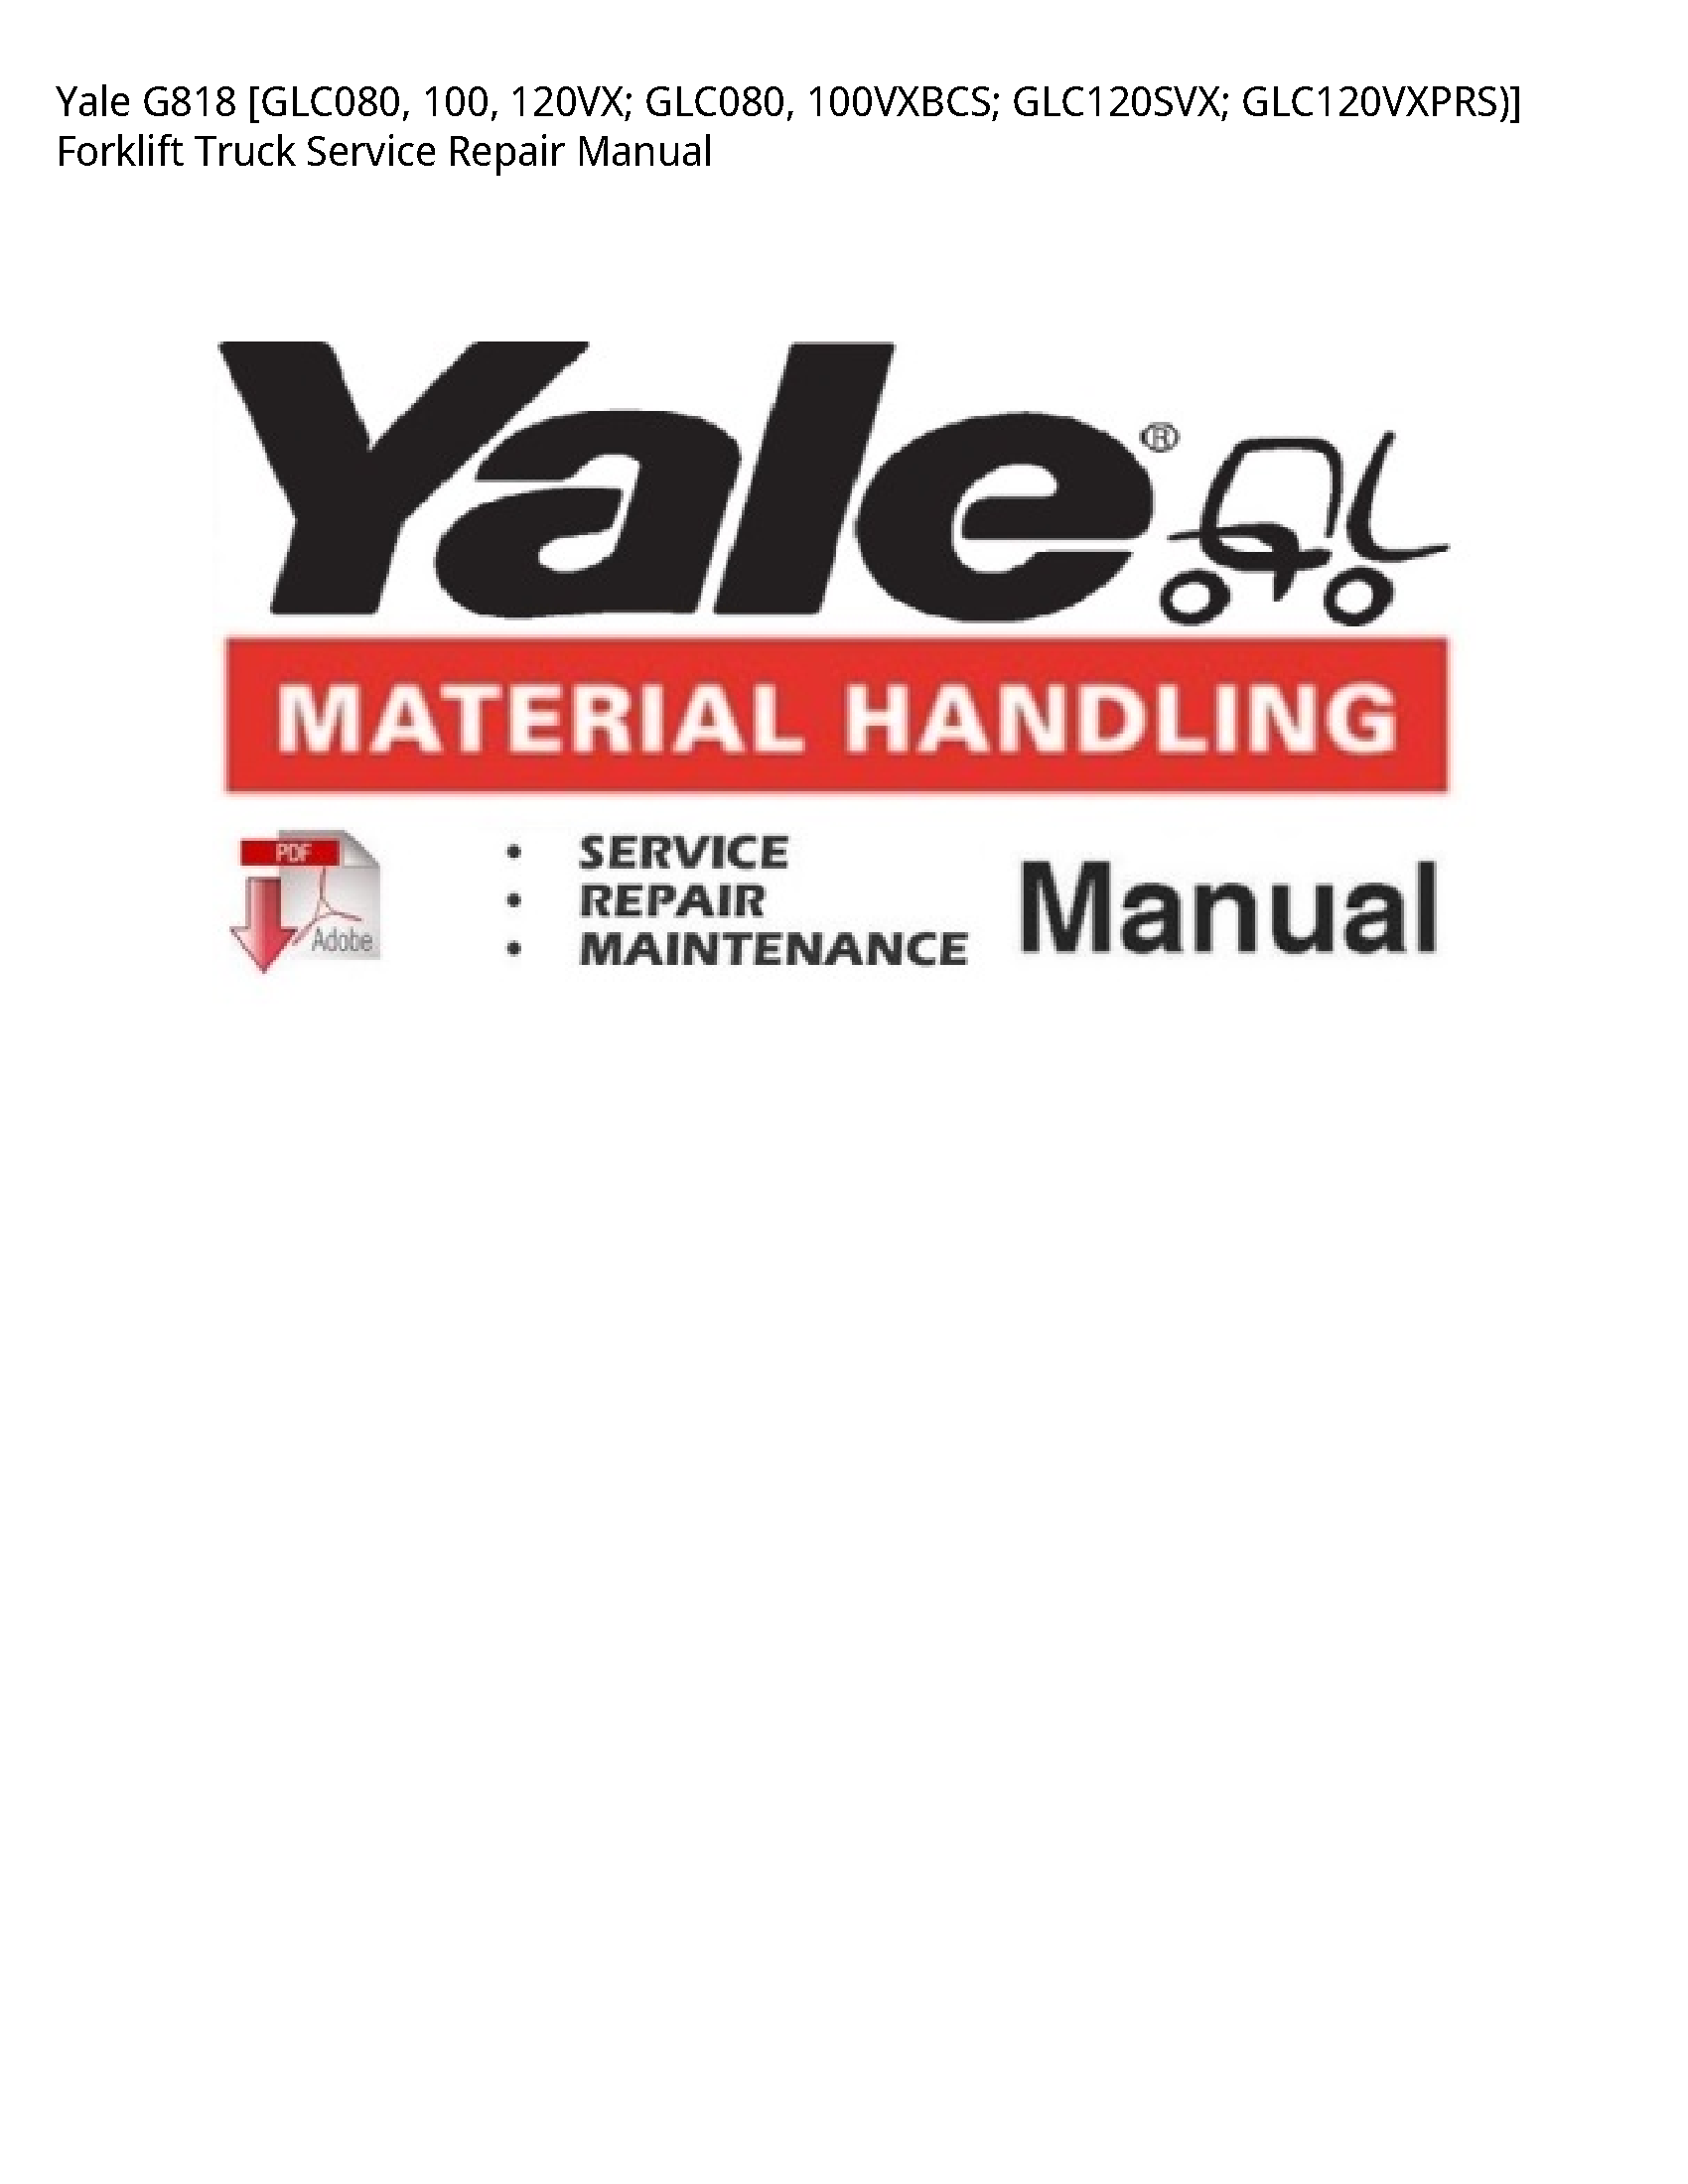 Yale G818 Forklift Truck manual